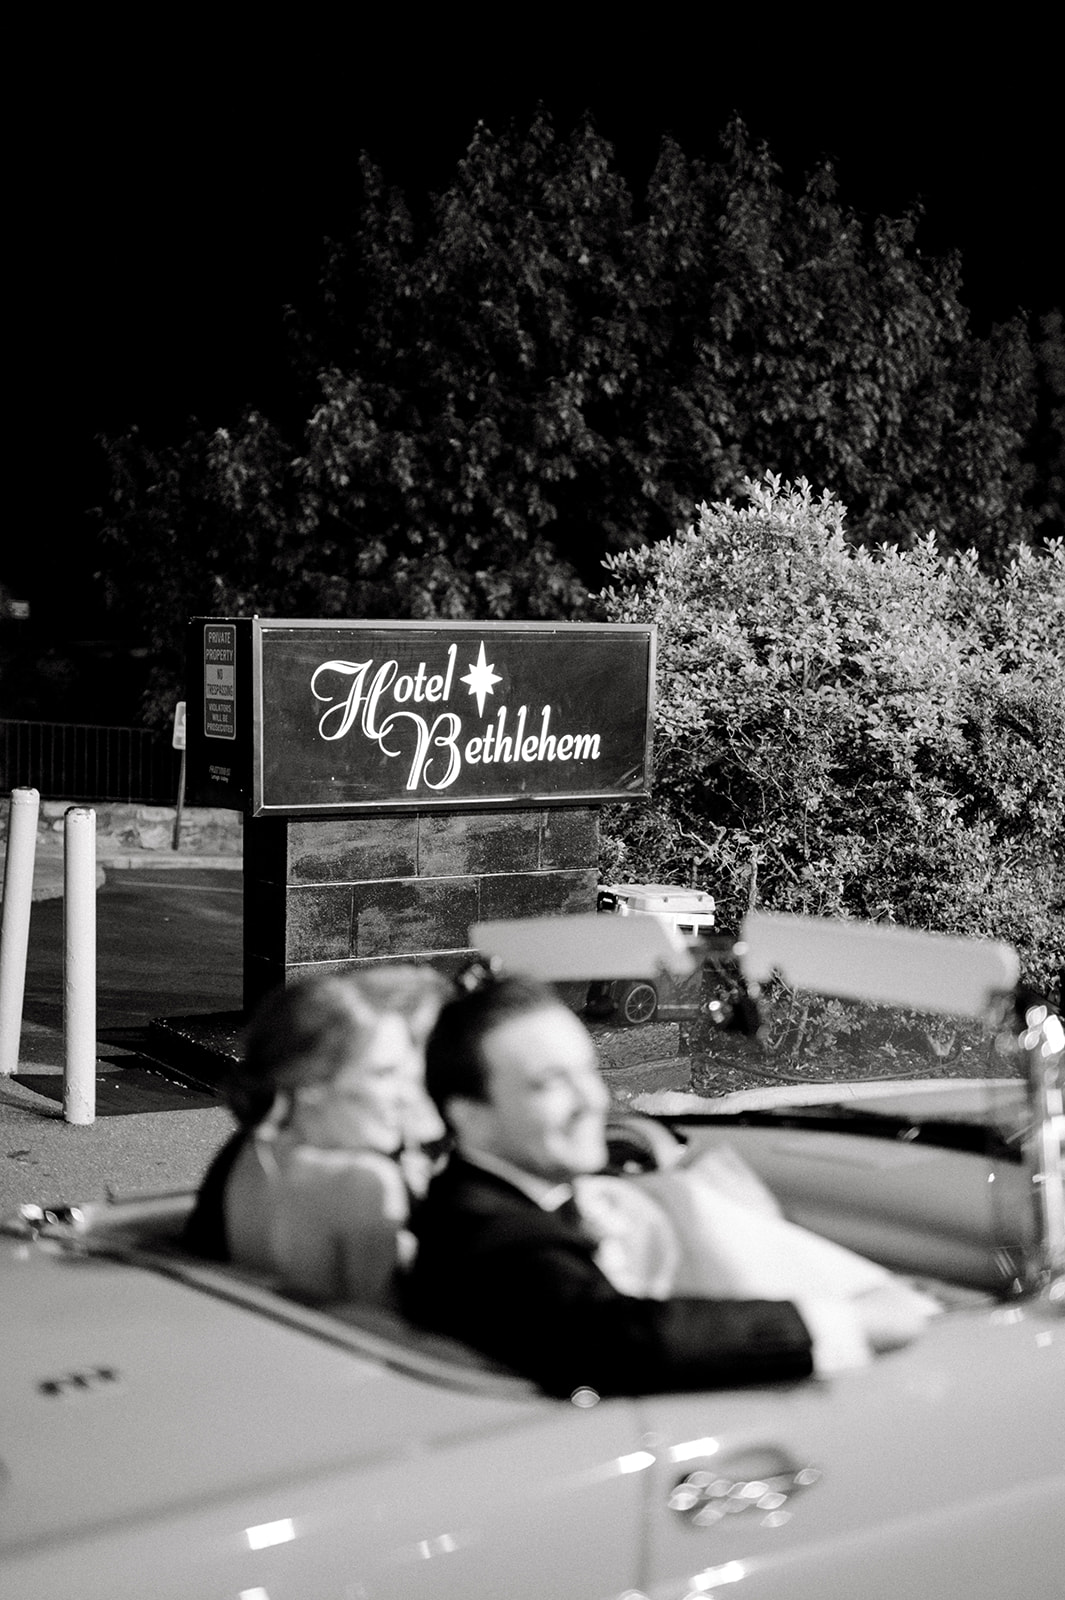 black and white photo of bride and groom in getaway car outside hotel bethlehem sign